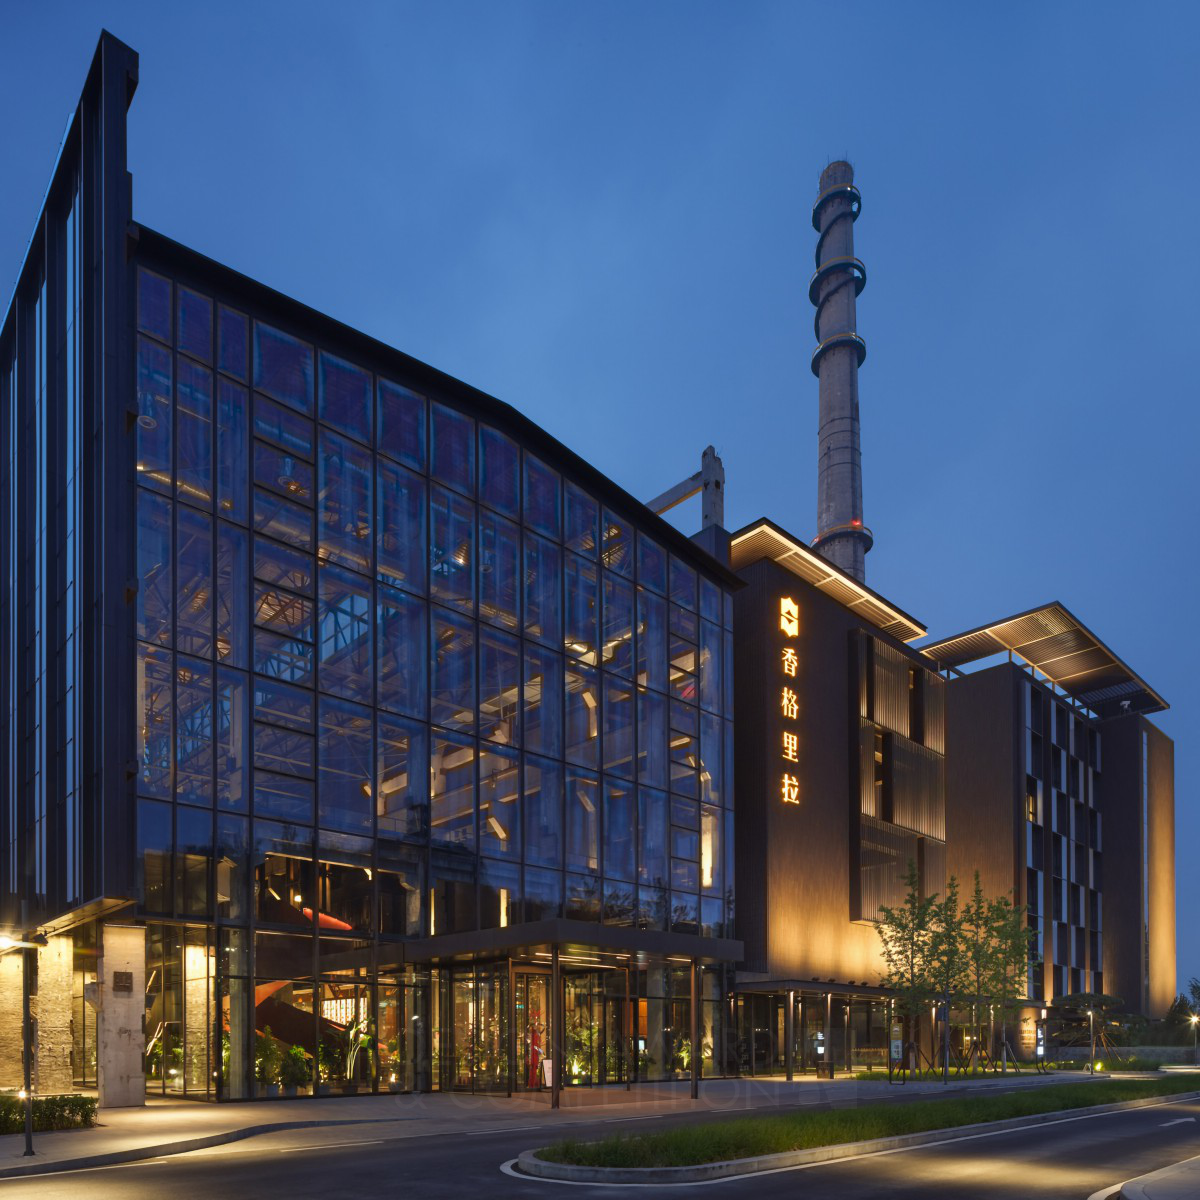 Shangri-la Shougang Park: A Fusion of Industrial Heritage and Innovative Lighting